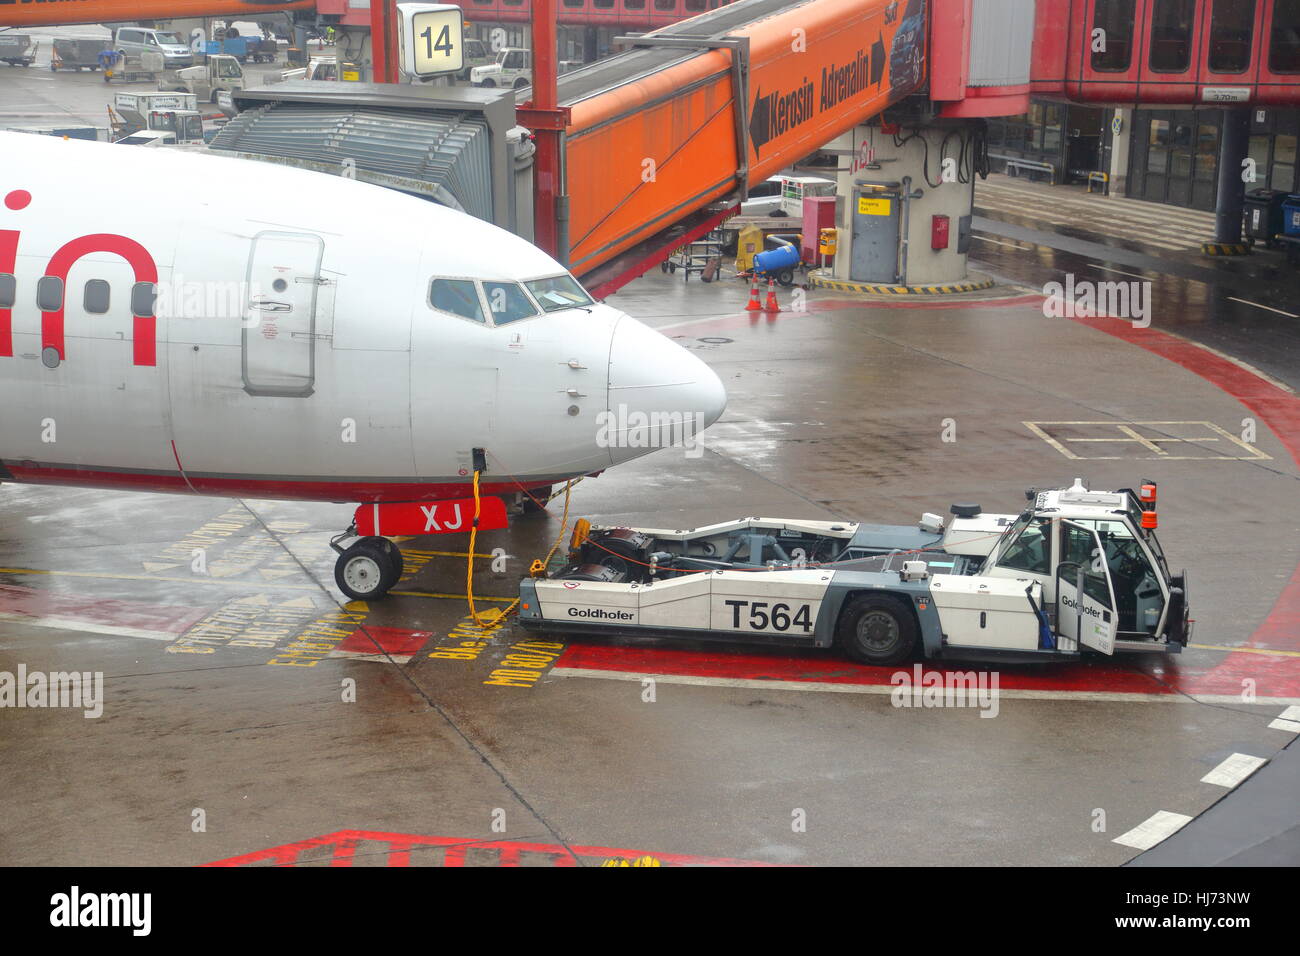 Air Berlin plane at the gate at Berlin Tegel Airport, Germany Stock Photo